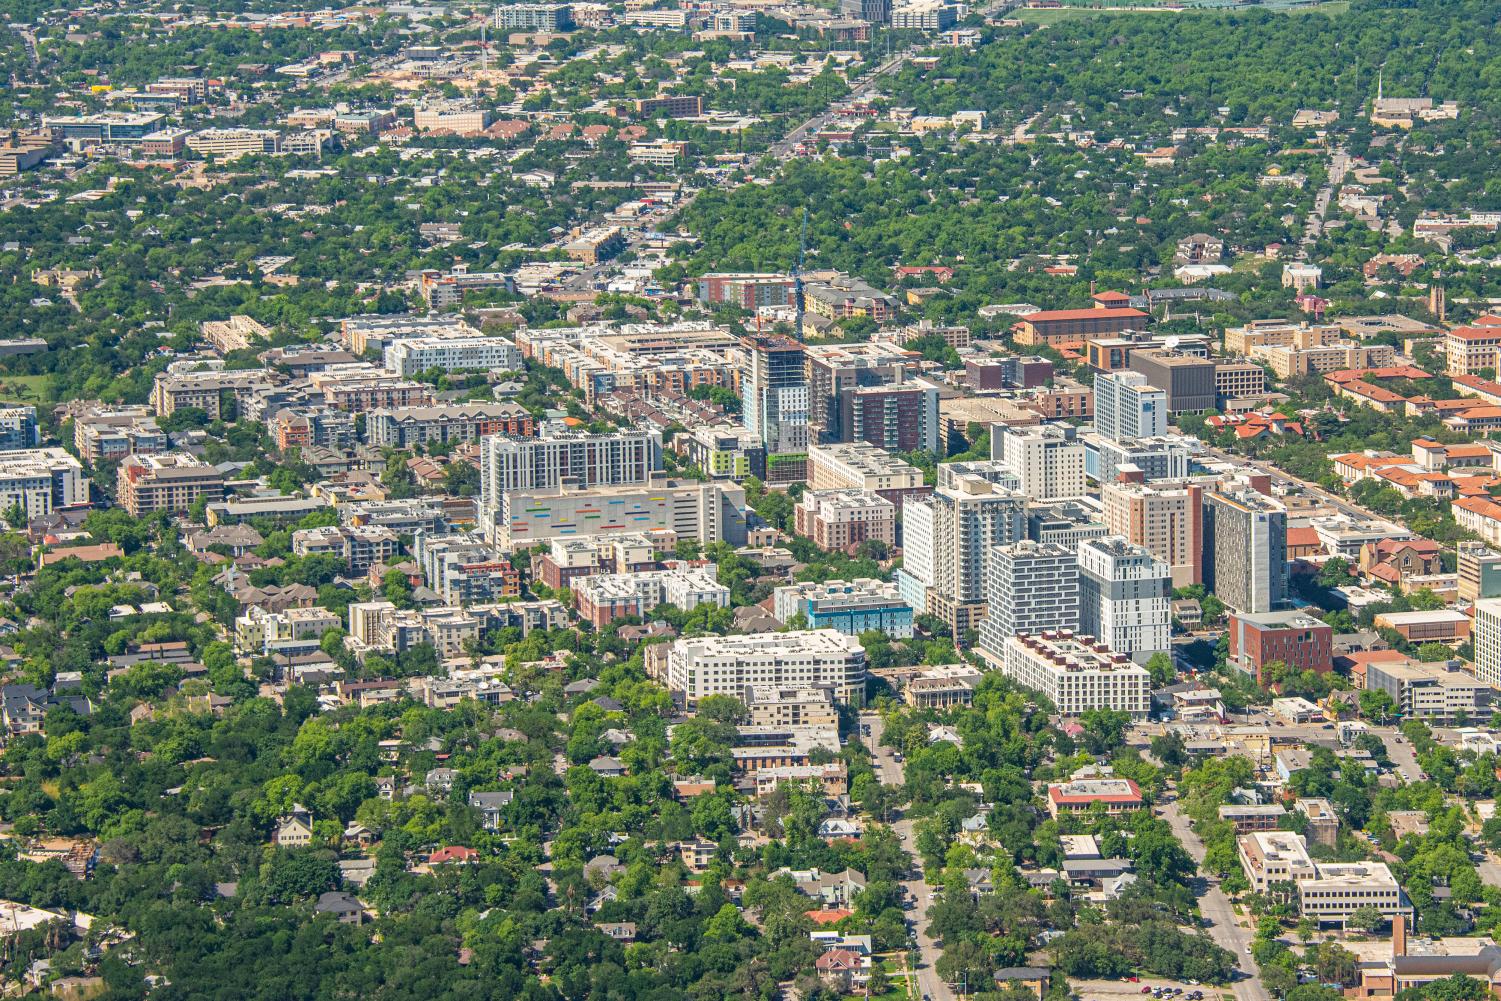 Overhead shot of West Campus in Austin, Texas